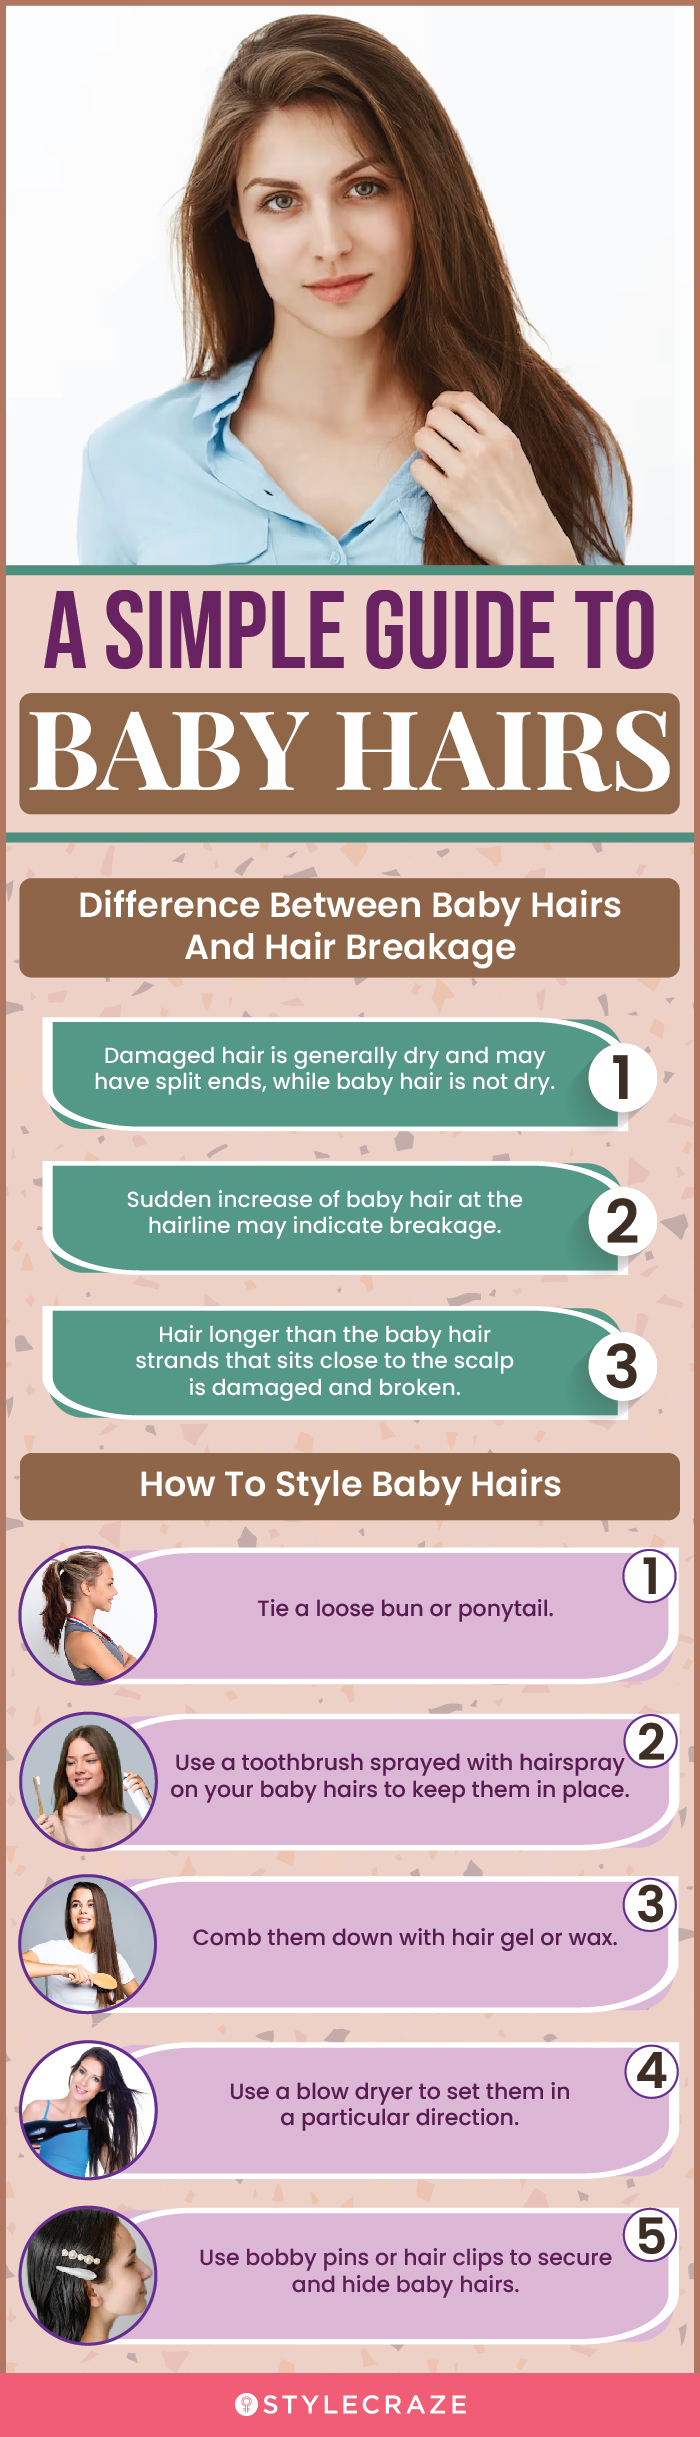 a simple guide to baby hairs(infographic)